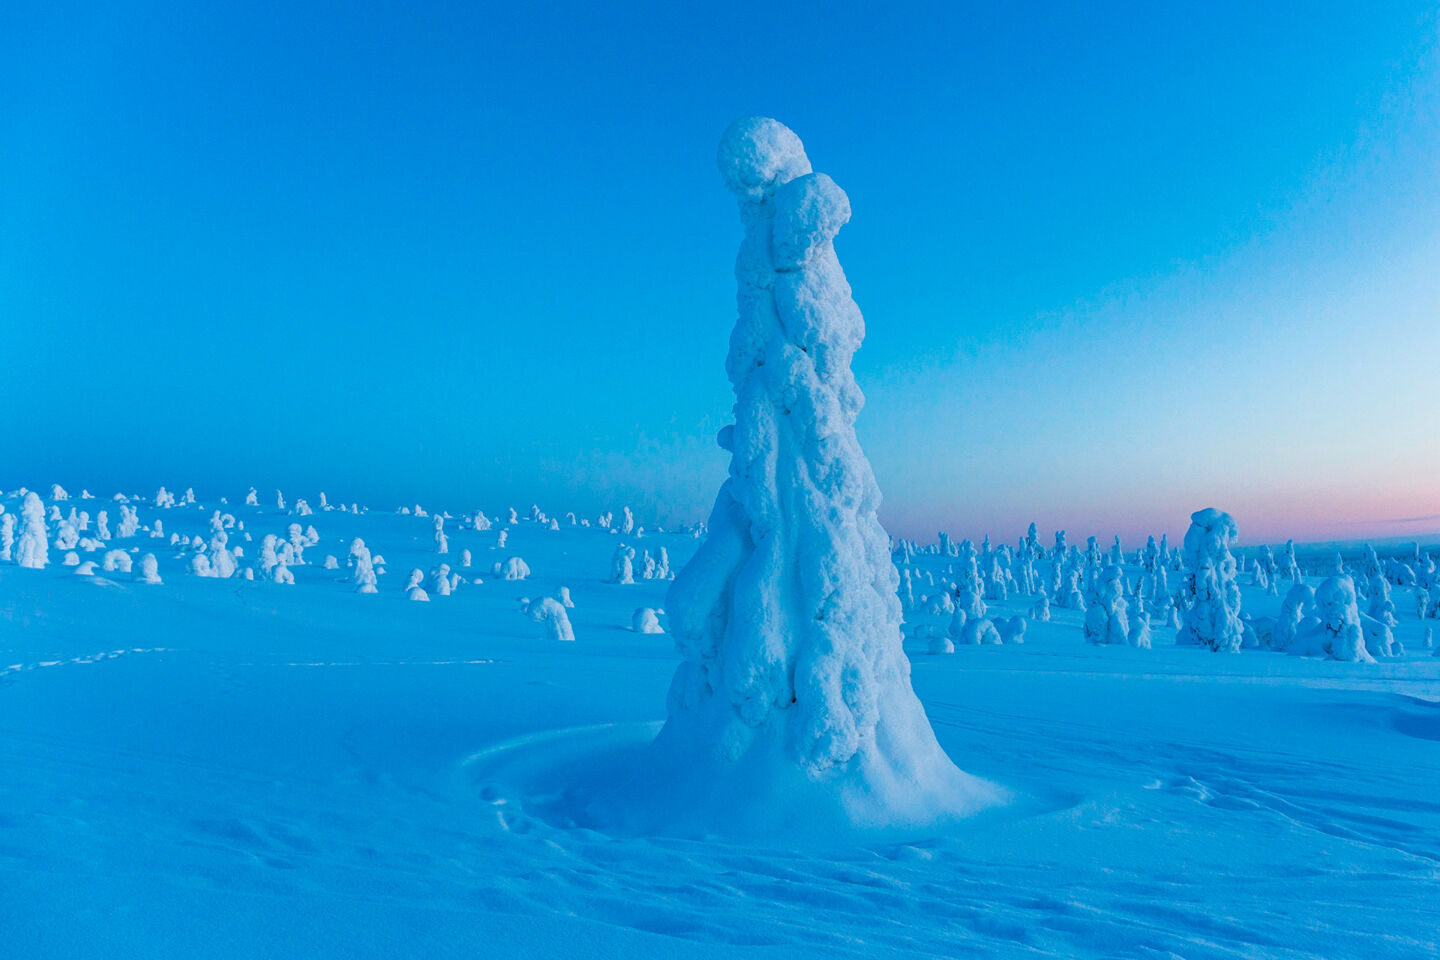 Blue moment and snow-crowned trees in Riisitunturi National Park in Posio, a Finnish Lapland filming location